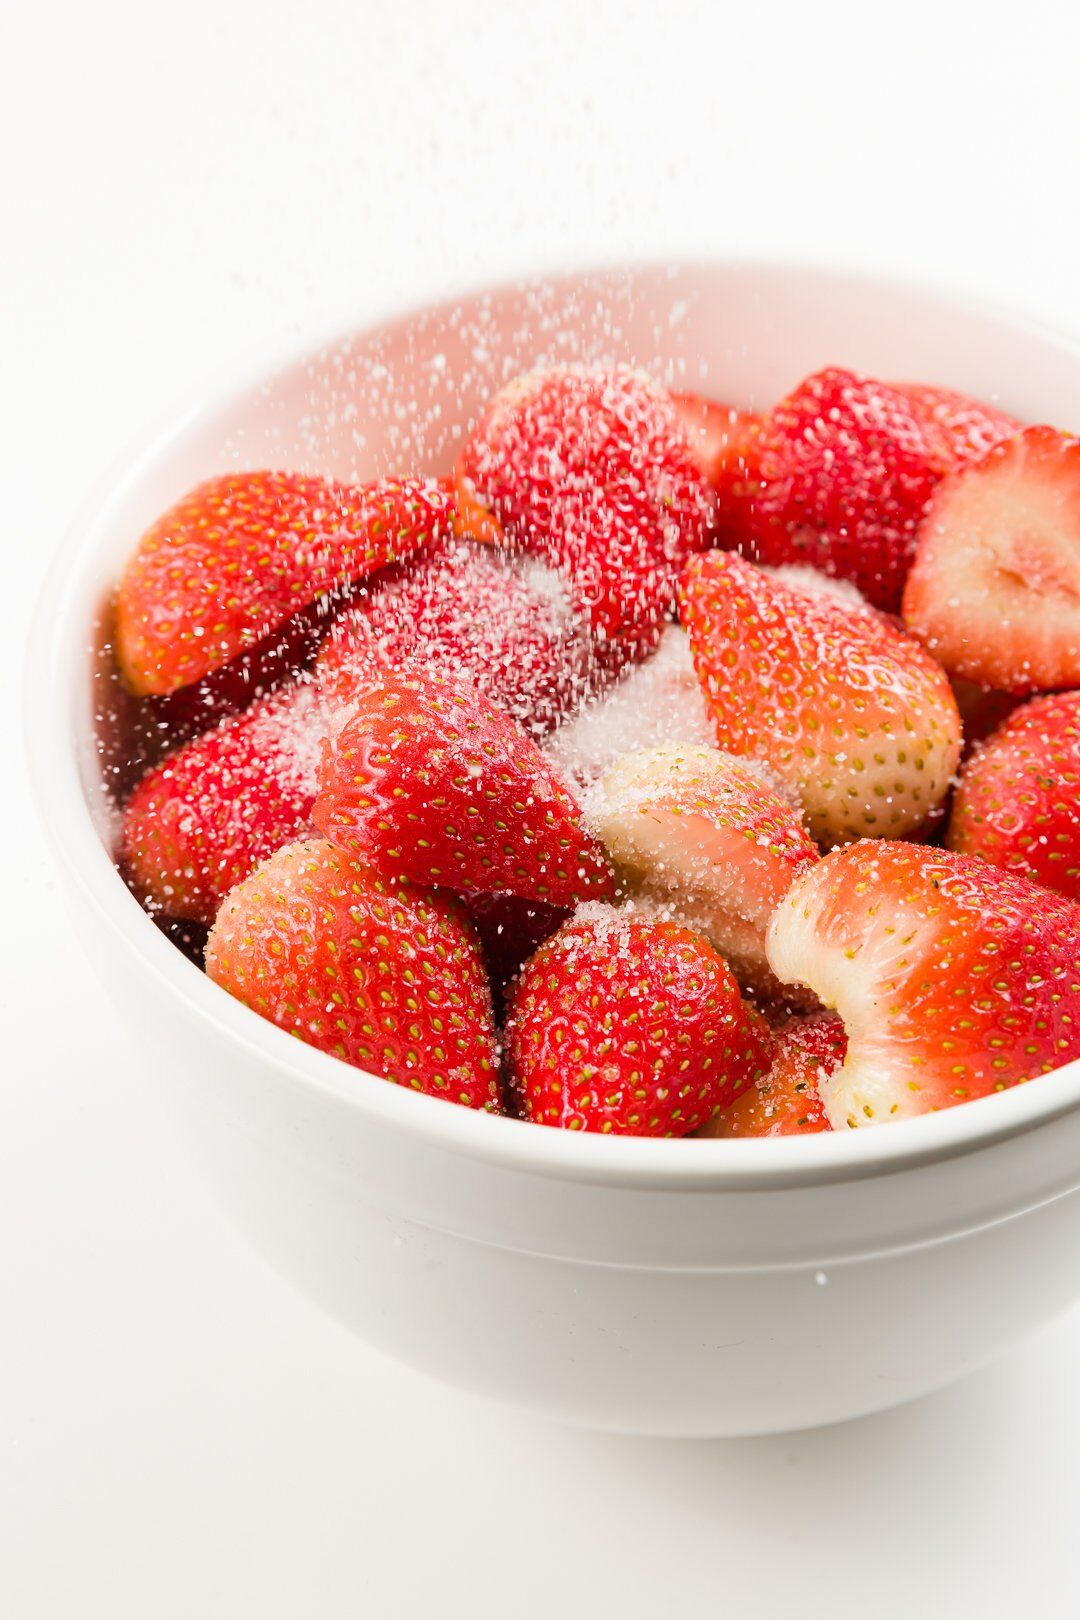 Sugar being poured over a large bowl of strawberries